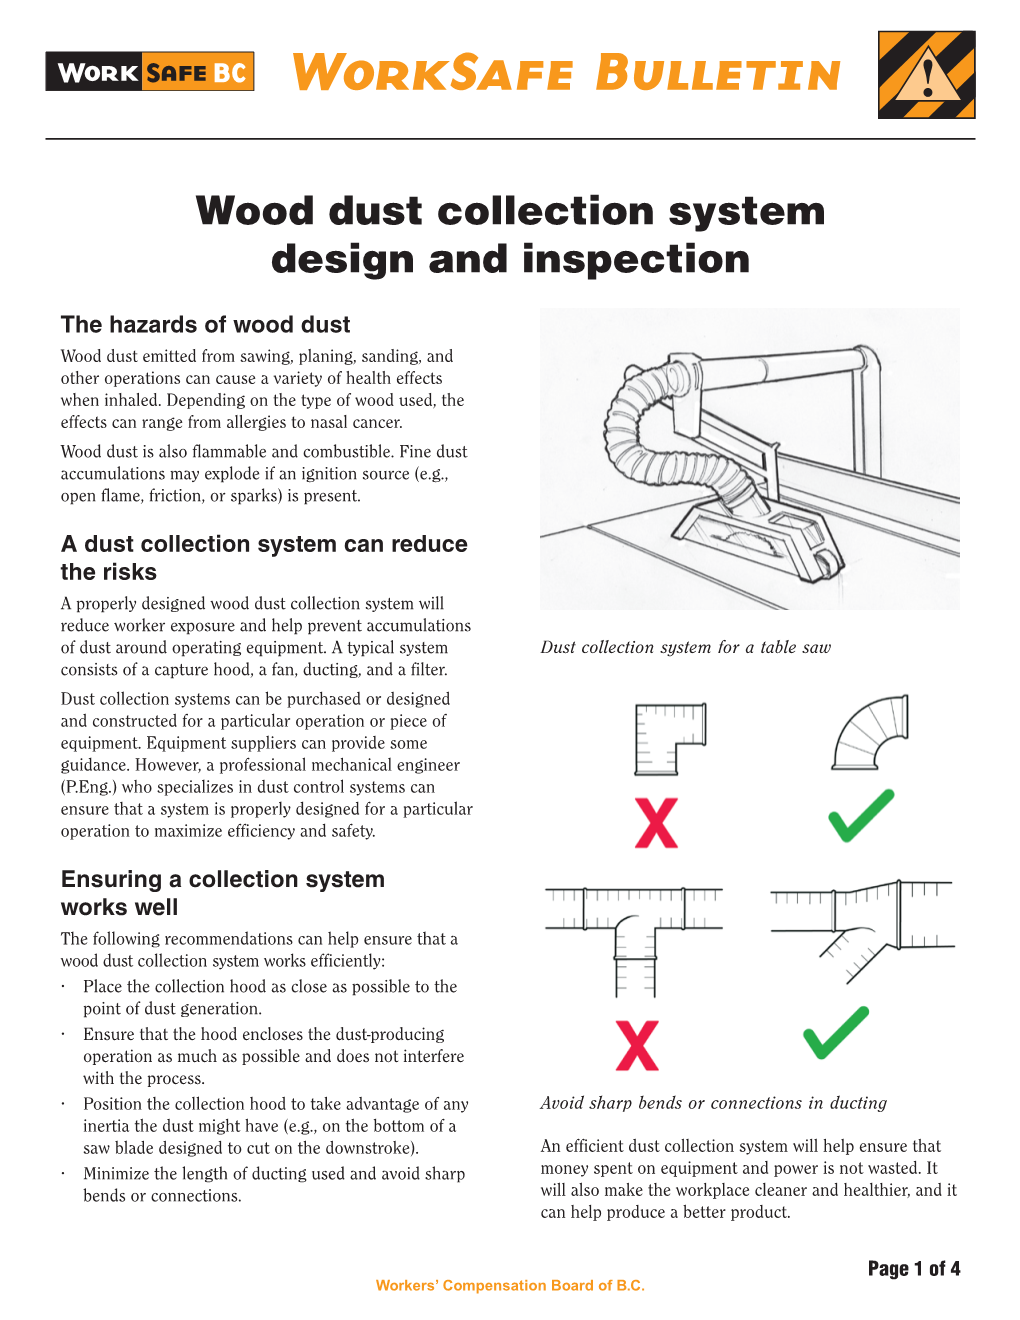 Wood Dust Collection System Design and Inspection